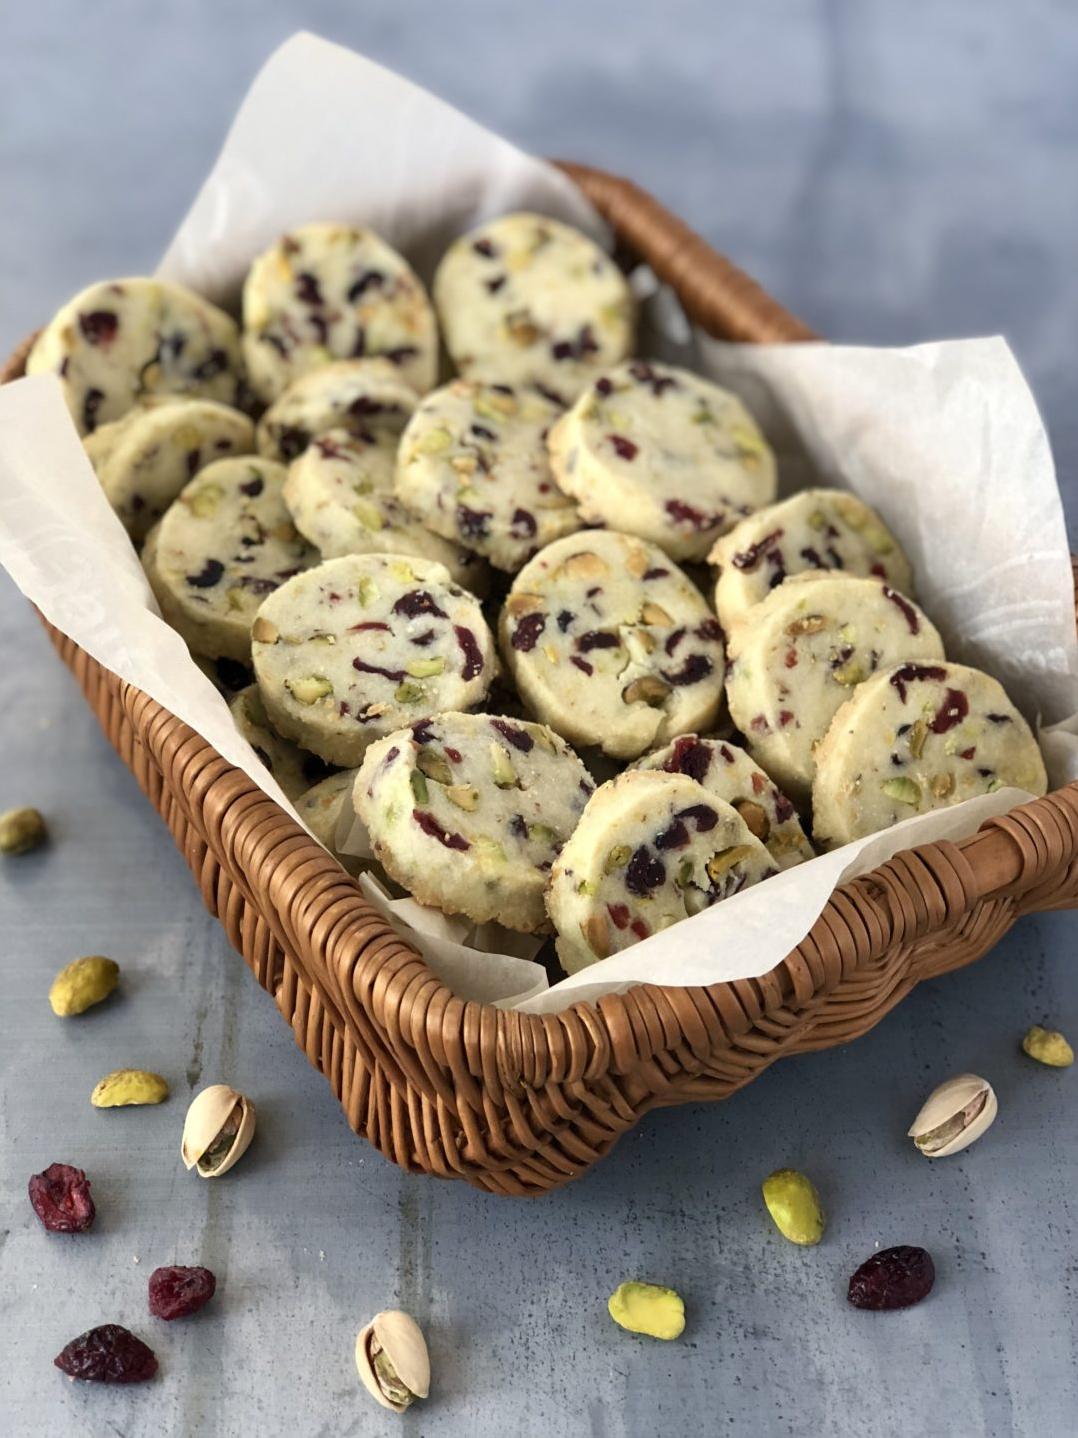  Your taste buds will thank you for these delightful cookies that are perfect for gifting.